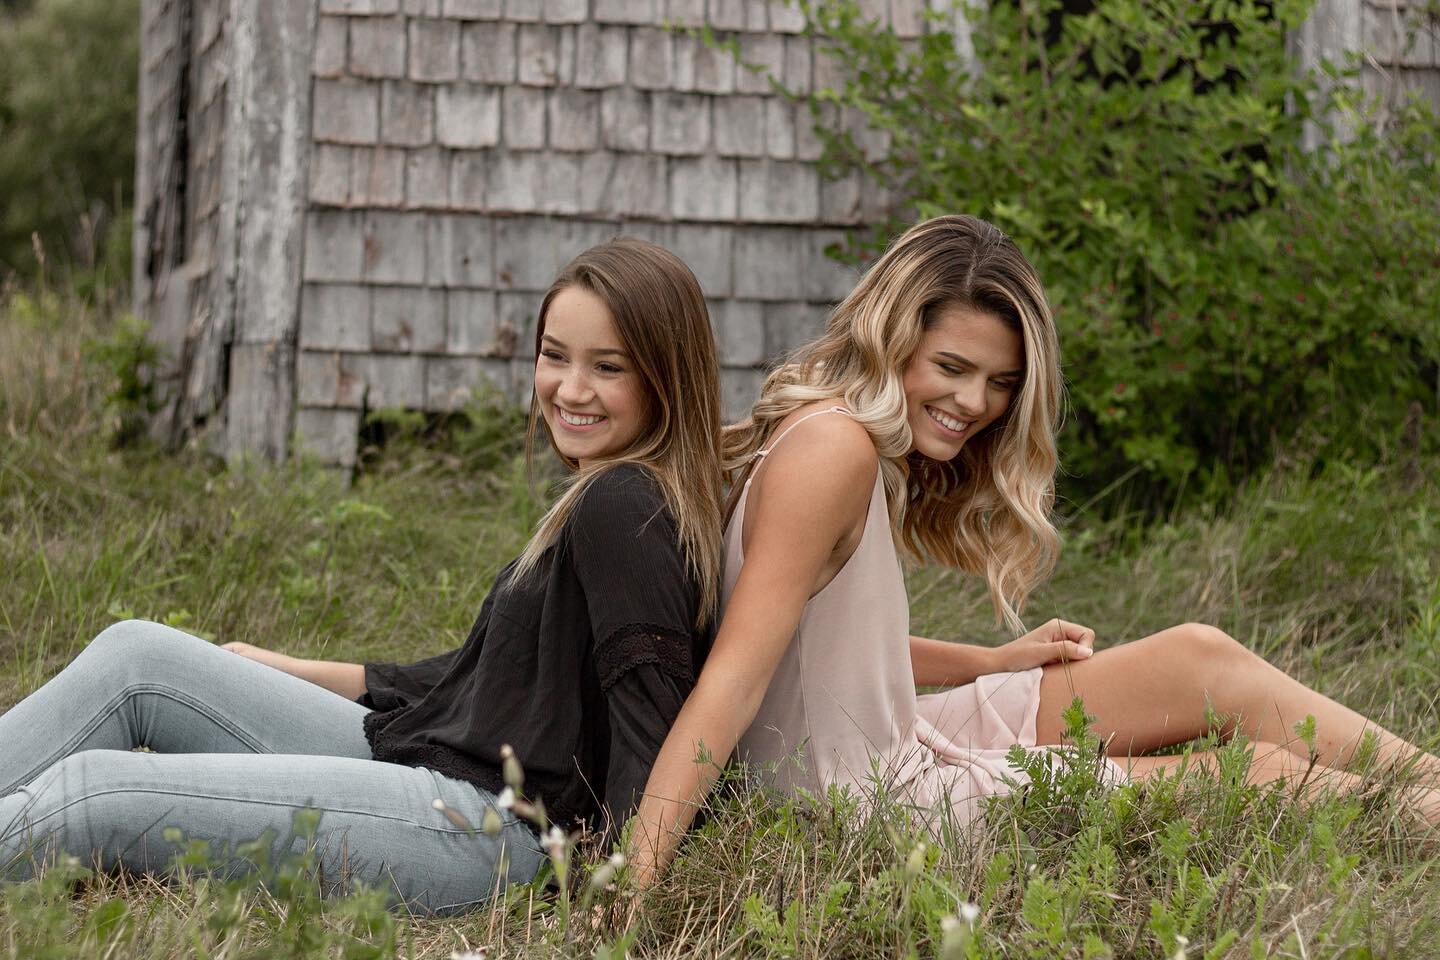 Don&rsquo;t forget to bring your best friend along to your senior session to be your hype girl and to join you for a few snaps!

#bestfriendshoot #seniorpictures #seniorportraits #oregonseniorphotographer #oregonphotographer #monmouthoregon #independ